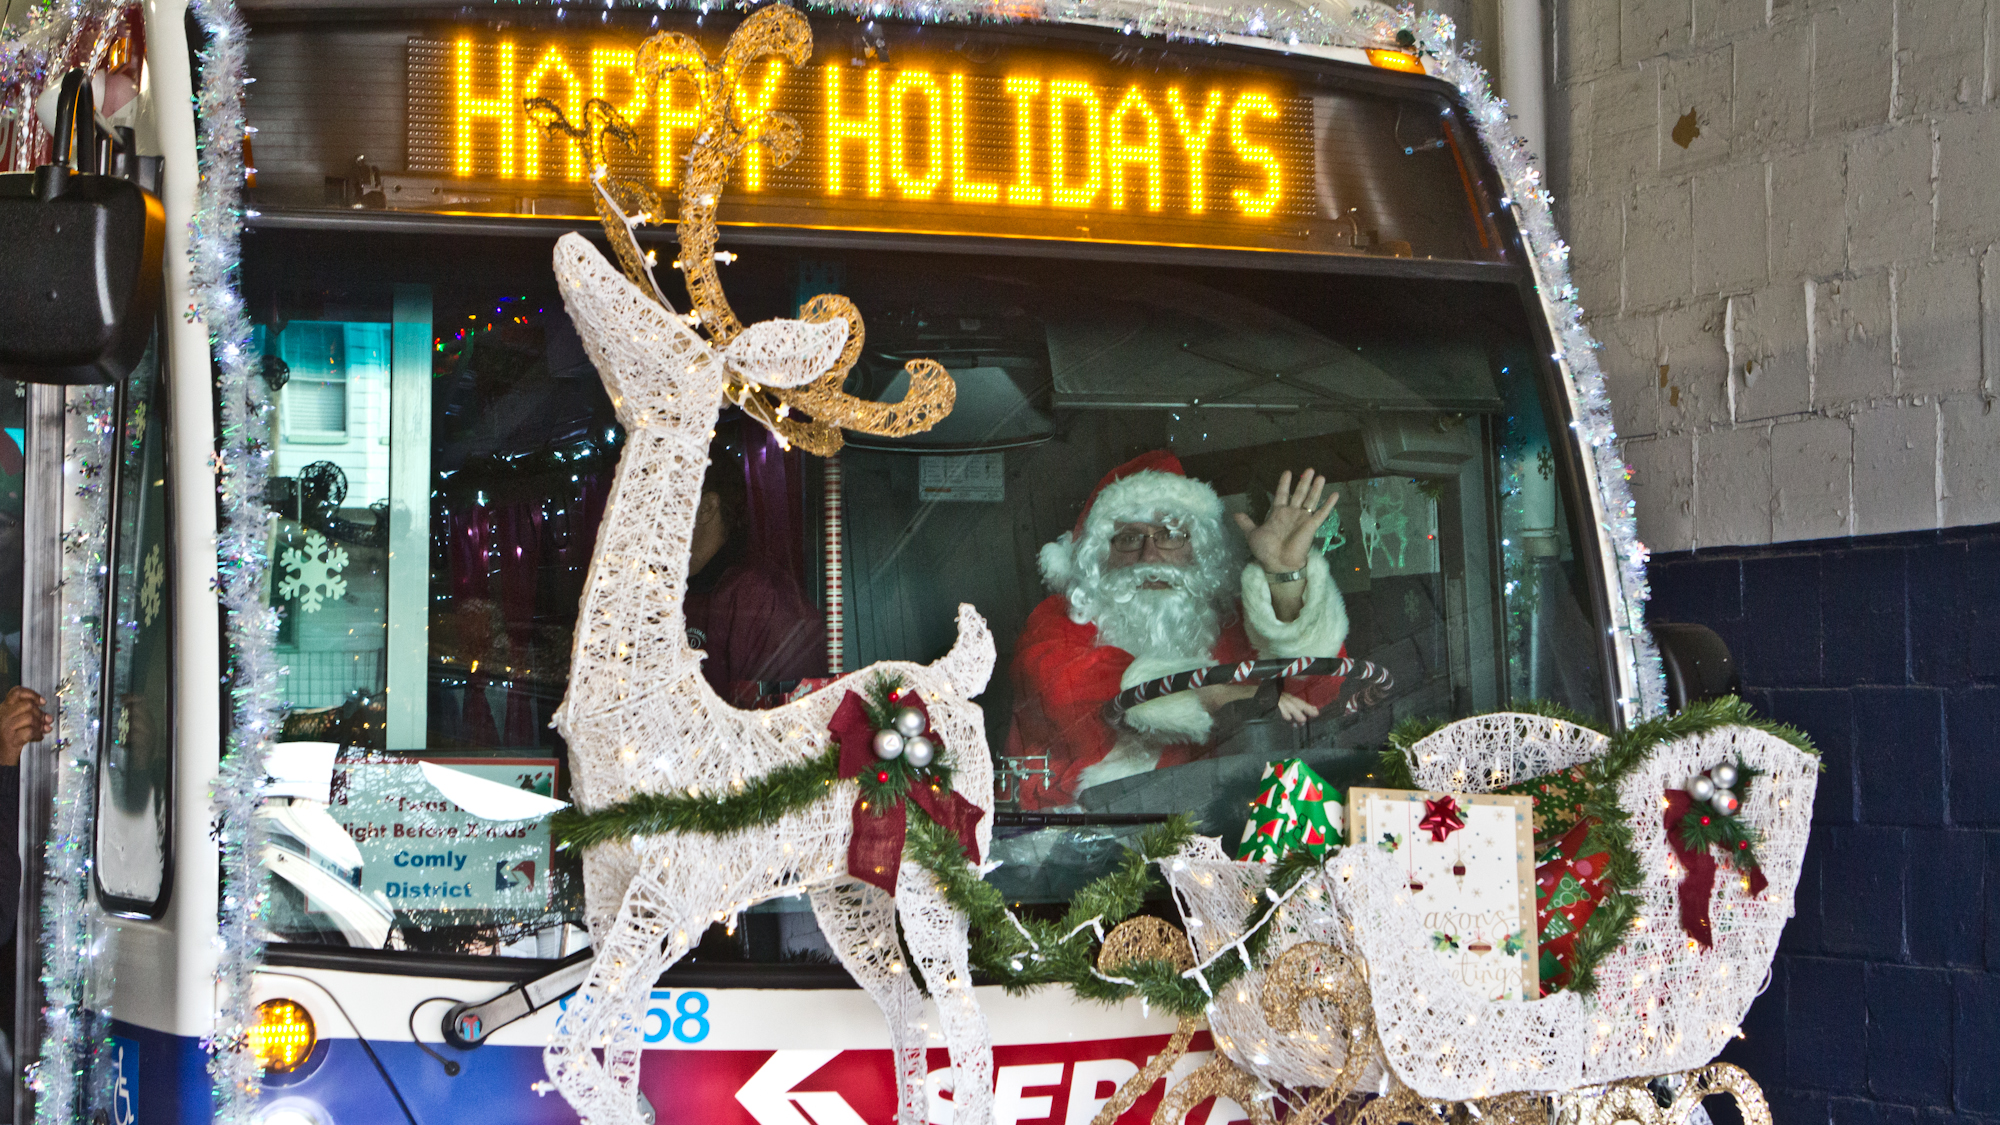 SEPTA’s Comly district’s decorations were inspired by the Nigh Before Christmas. (Kimberly Paynter/WHYY)